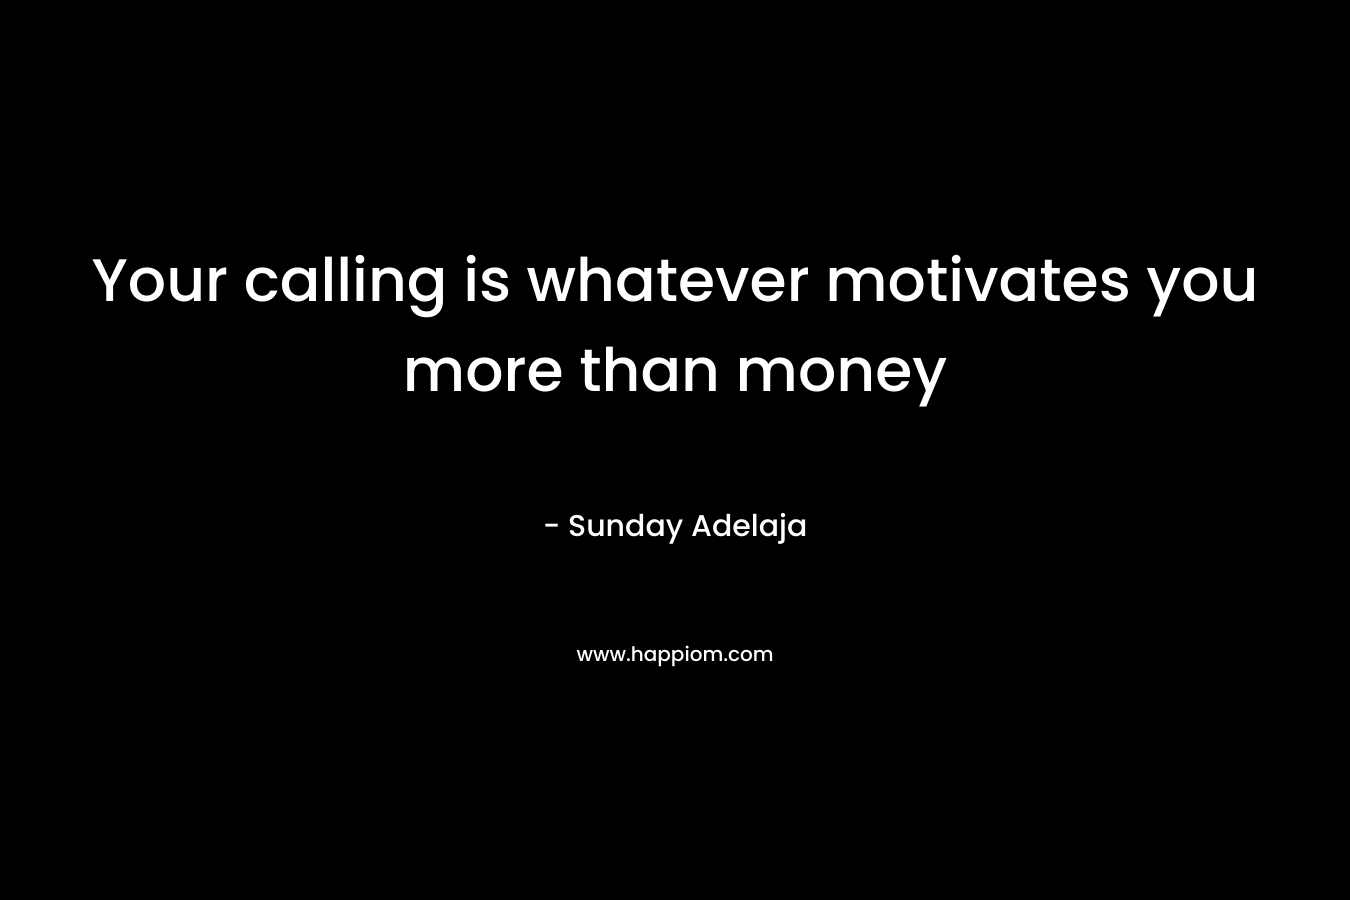 Your calling is whatever motivates you more than money